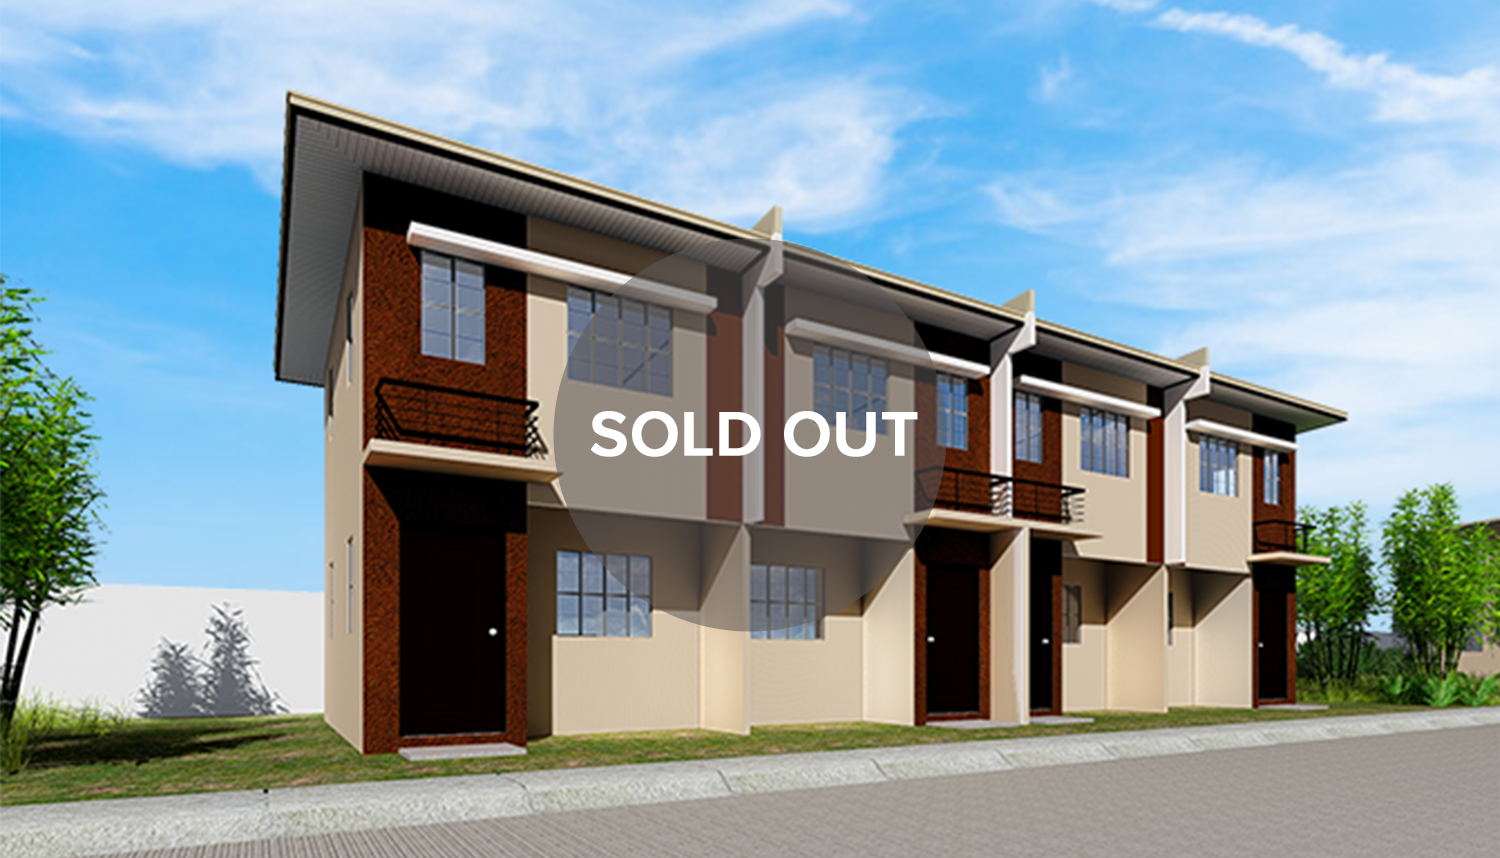 /assets/properties-house-model-gallery-and-landmarks-icons/lumina-home-models/home-model-gallery/angeli-townhouse/angeli-townhouse-image-2-sold-out.png